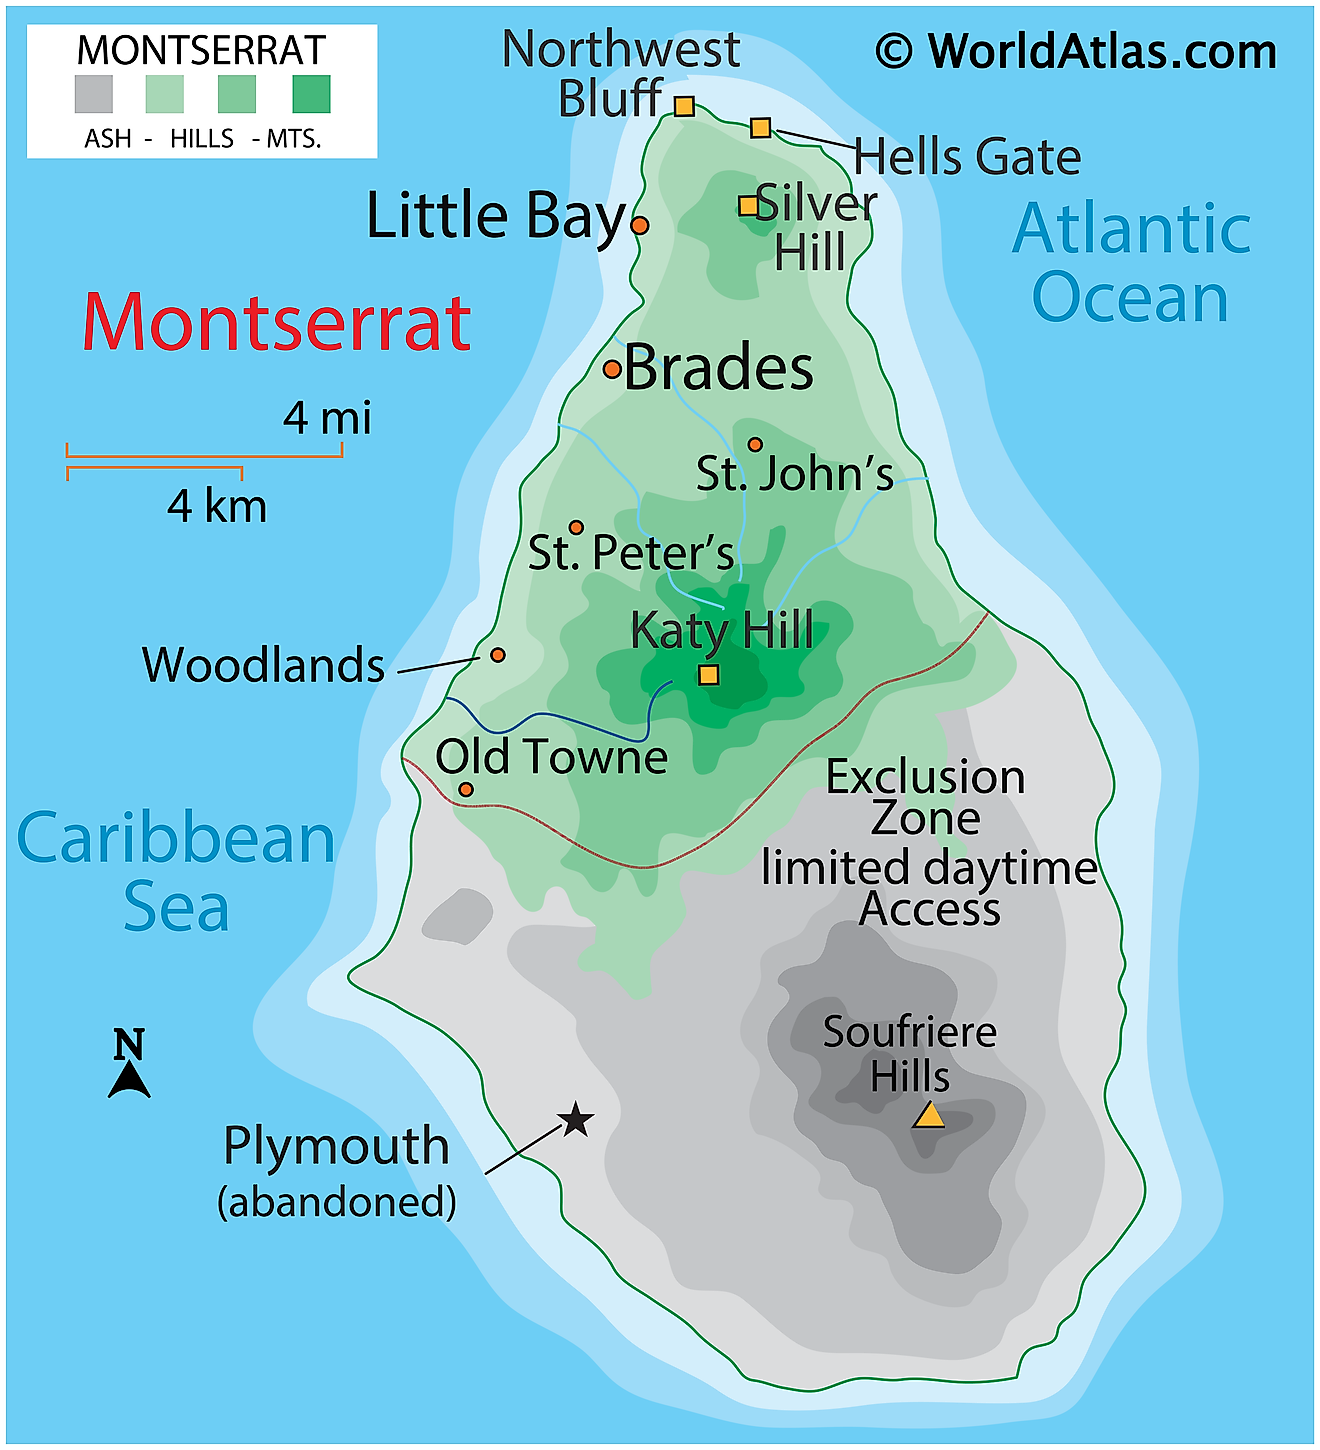 Physical Map of Montserrat showing relief, hills, highest point, Exclusion Zone, etc.